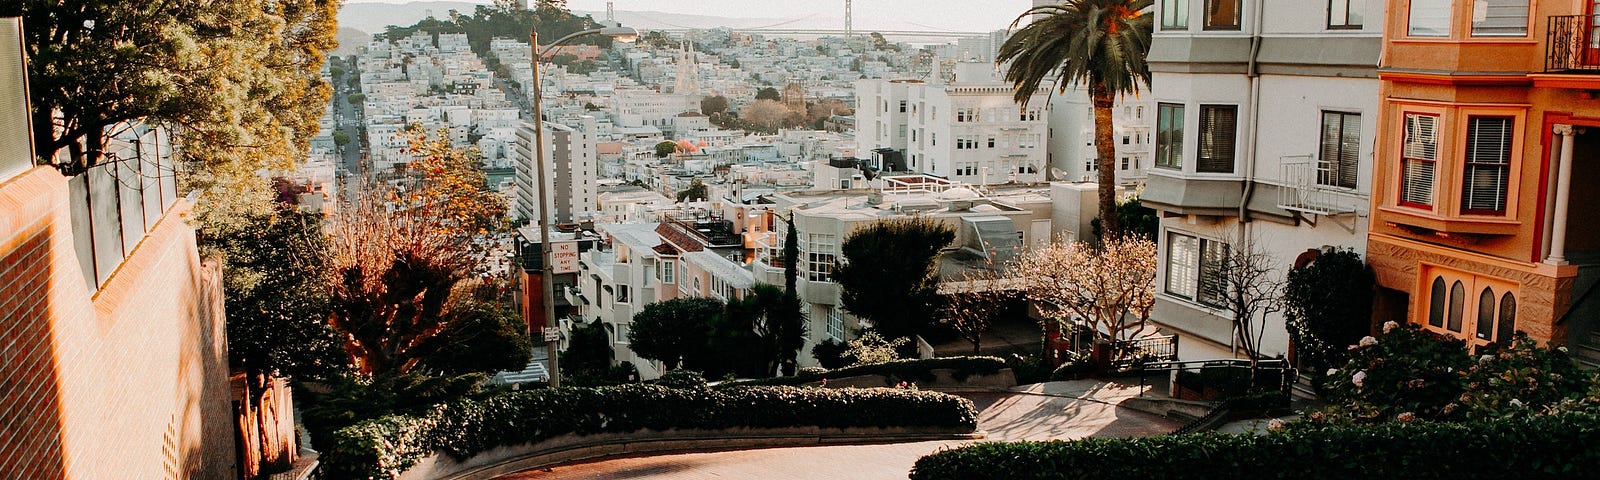 View of the city with Lombard Street in the foreground, as seen from the top of the hill Lombard winds down.